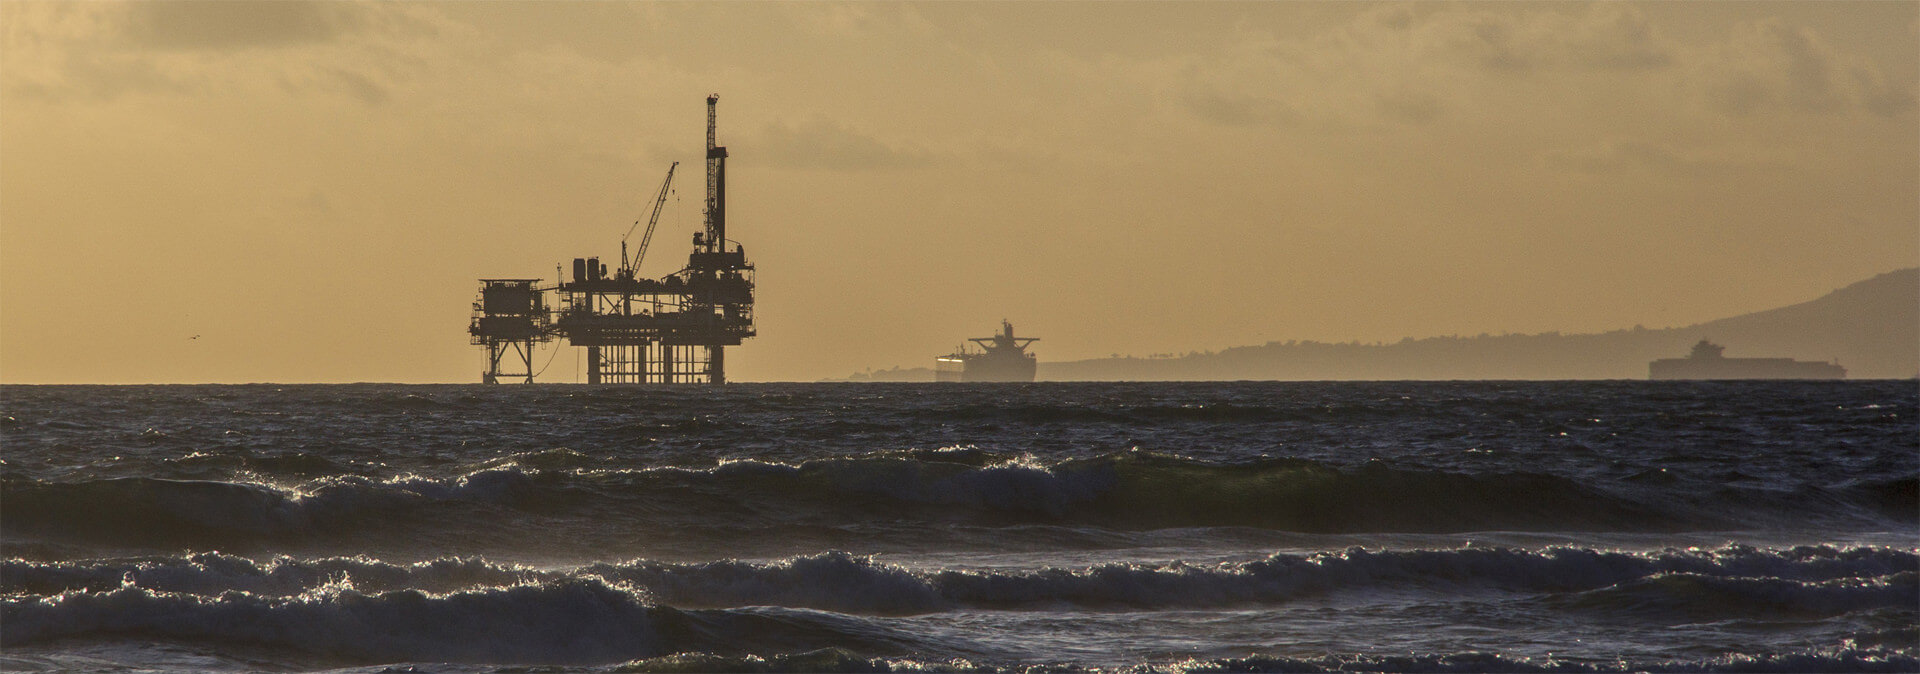 Offshore oil and gas platform that complies with EH&S standards.